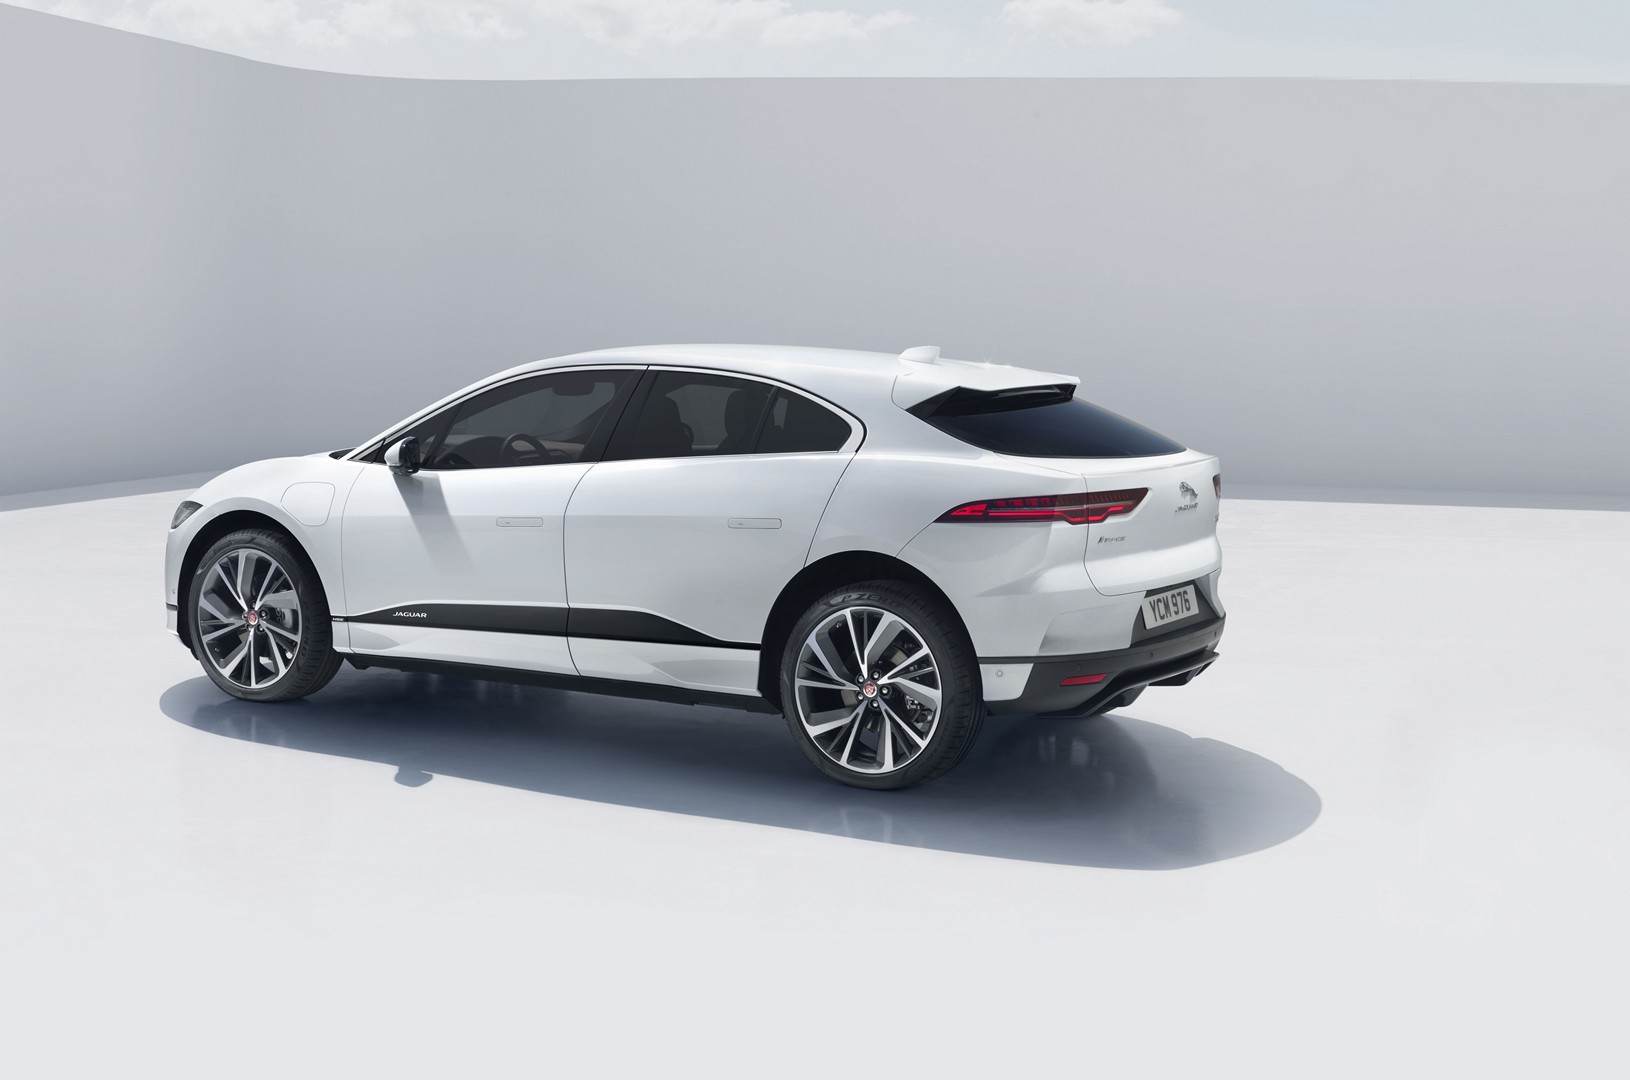 https://s1.cdn.autoevolution.com/images/news/gallery/2020-jaguar-i-pace-update-offers-234-miles-of-range-thanks-to-etrophy-know-how_4.jpg